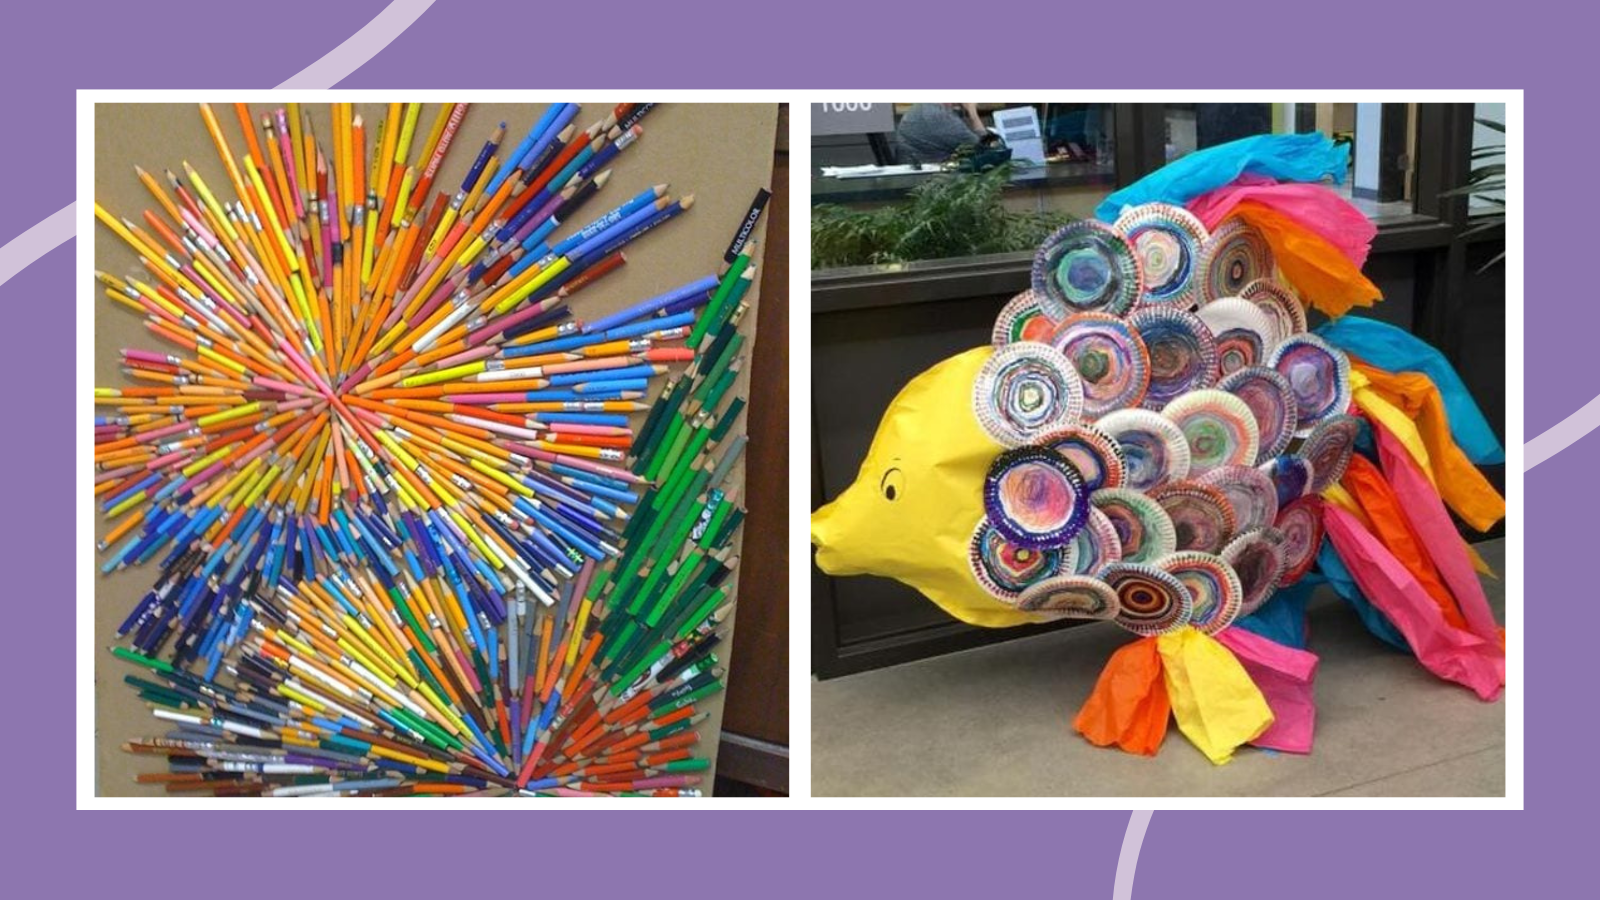 Examples of collaborative art project including watercolor paper plate fish sculpture and old pencils upcycled into a sculpture.